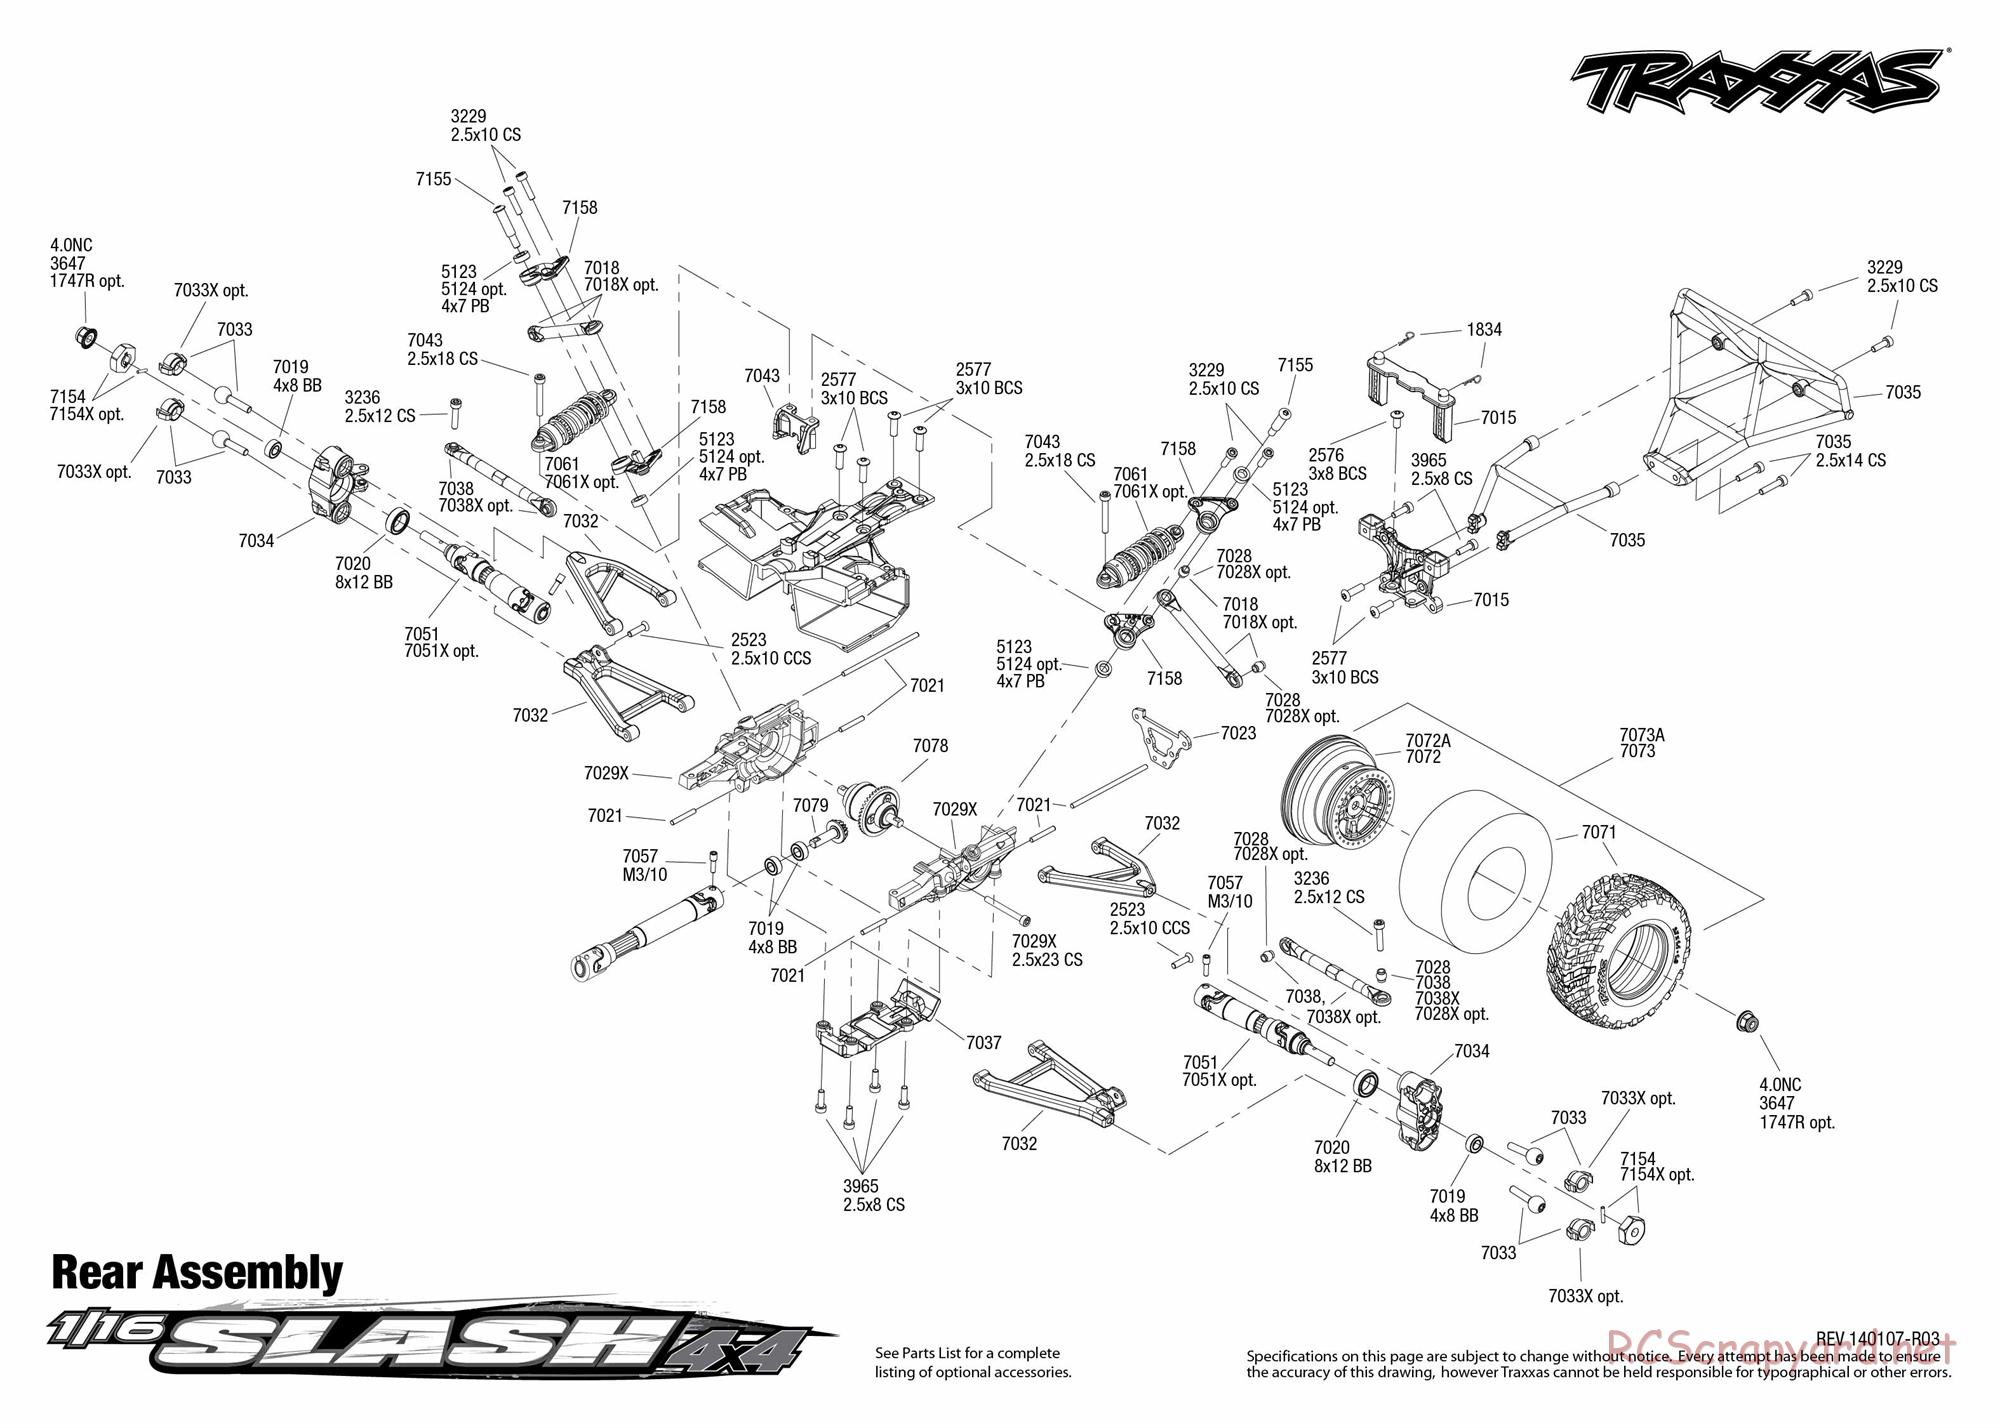 Traxxas - 1/16 Slash 4x4 Brushed (2013) - Exploded Views - Page 4